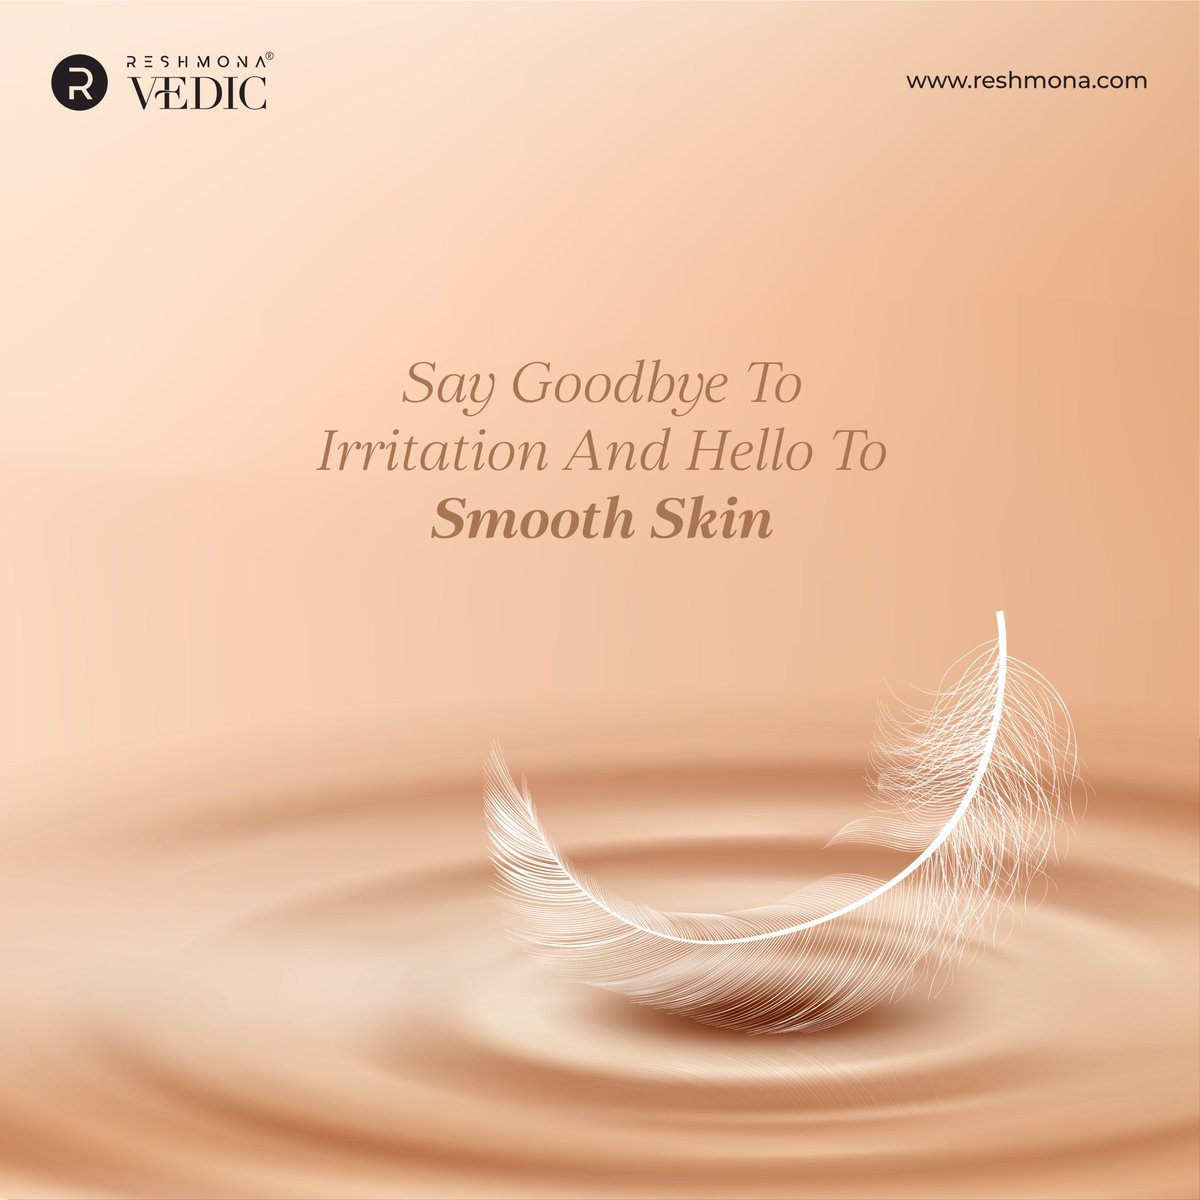 Achieve the epitome of skincare bliss with RESHMONA VEDIC. Bid farewell to irritation and embrace the allure of velvety-smooth skin. 

#SkincareGoals #SmoothSkin #NourishYourSkin #GlowingComplexion #NaturalBeauty #SkinLove #SkinCareRoutine #BeautyEssentials #SelfCareSunday